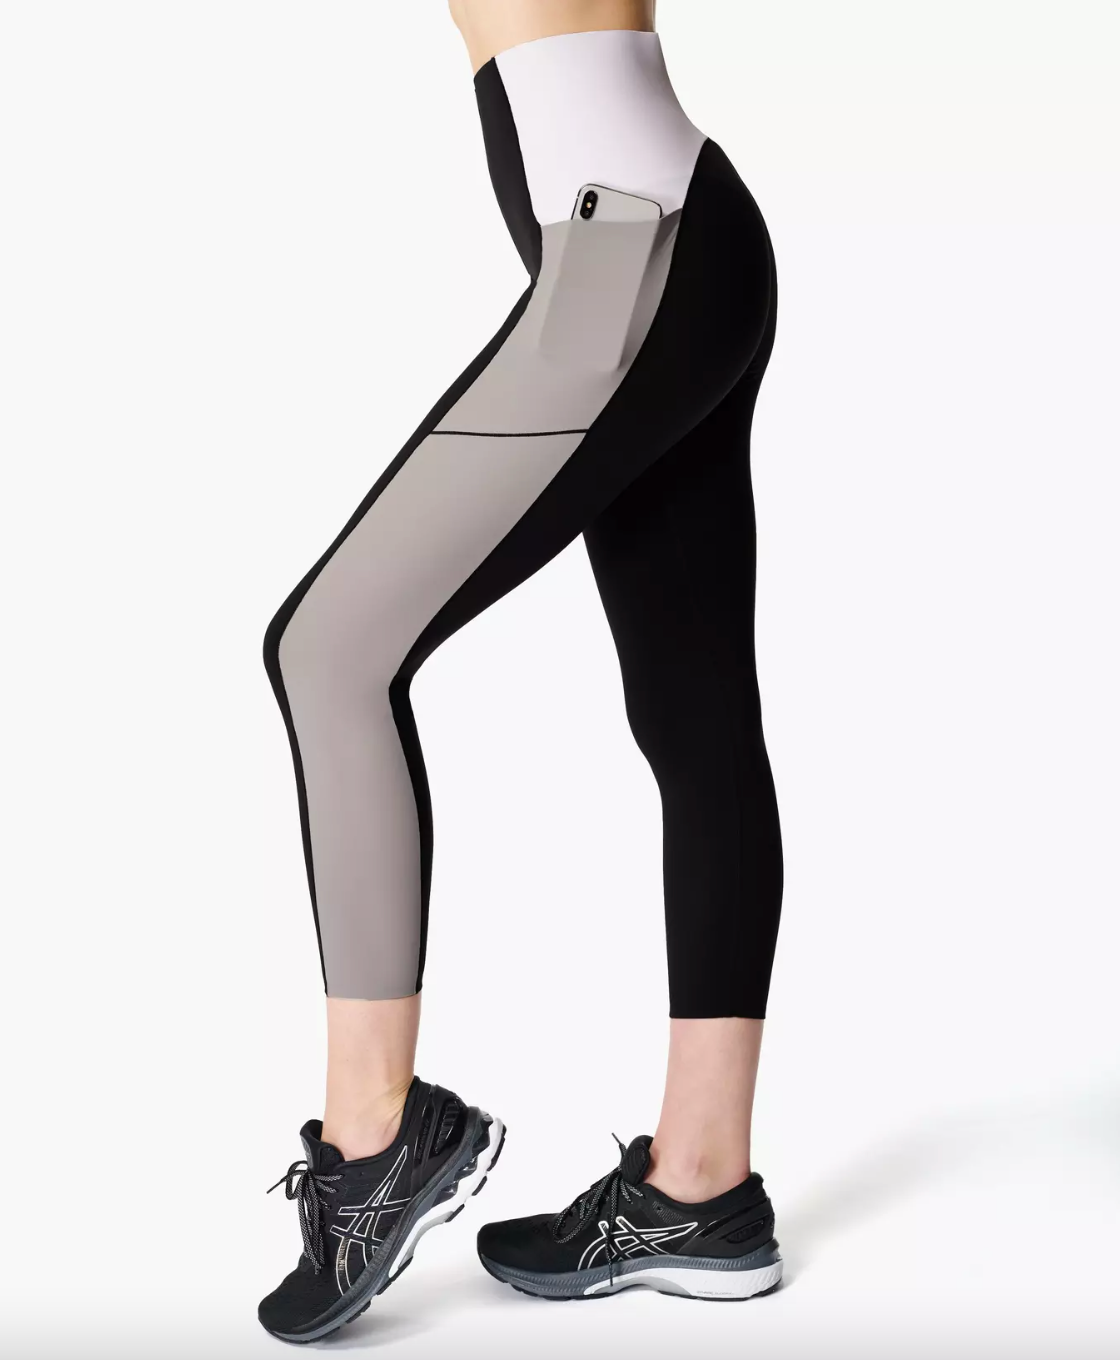 Sweaty Betty Sale: Get Up to 70% Off Leggings and Go-To Summer